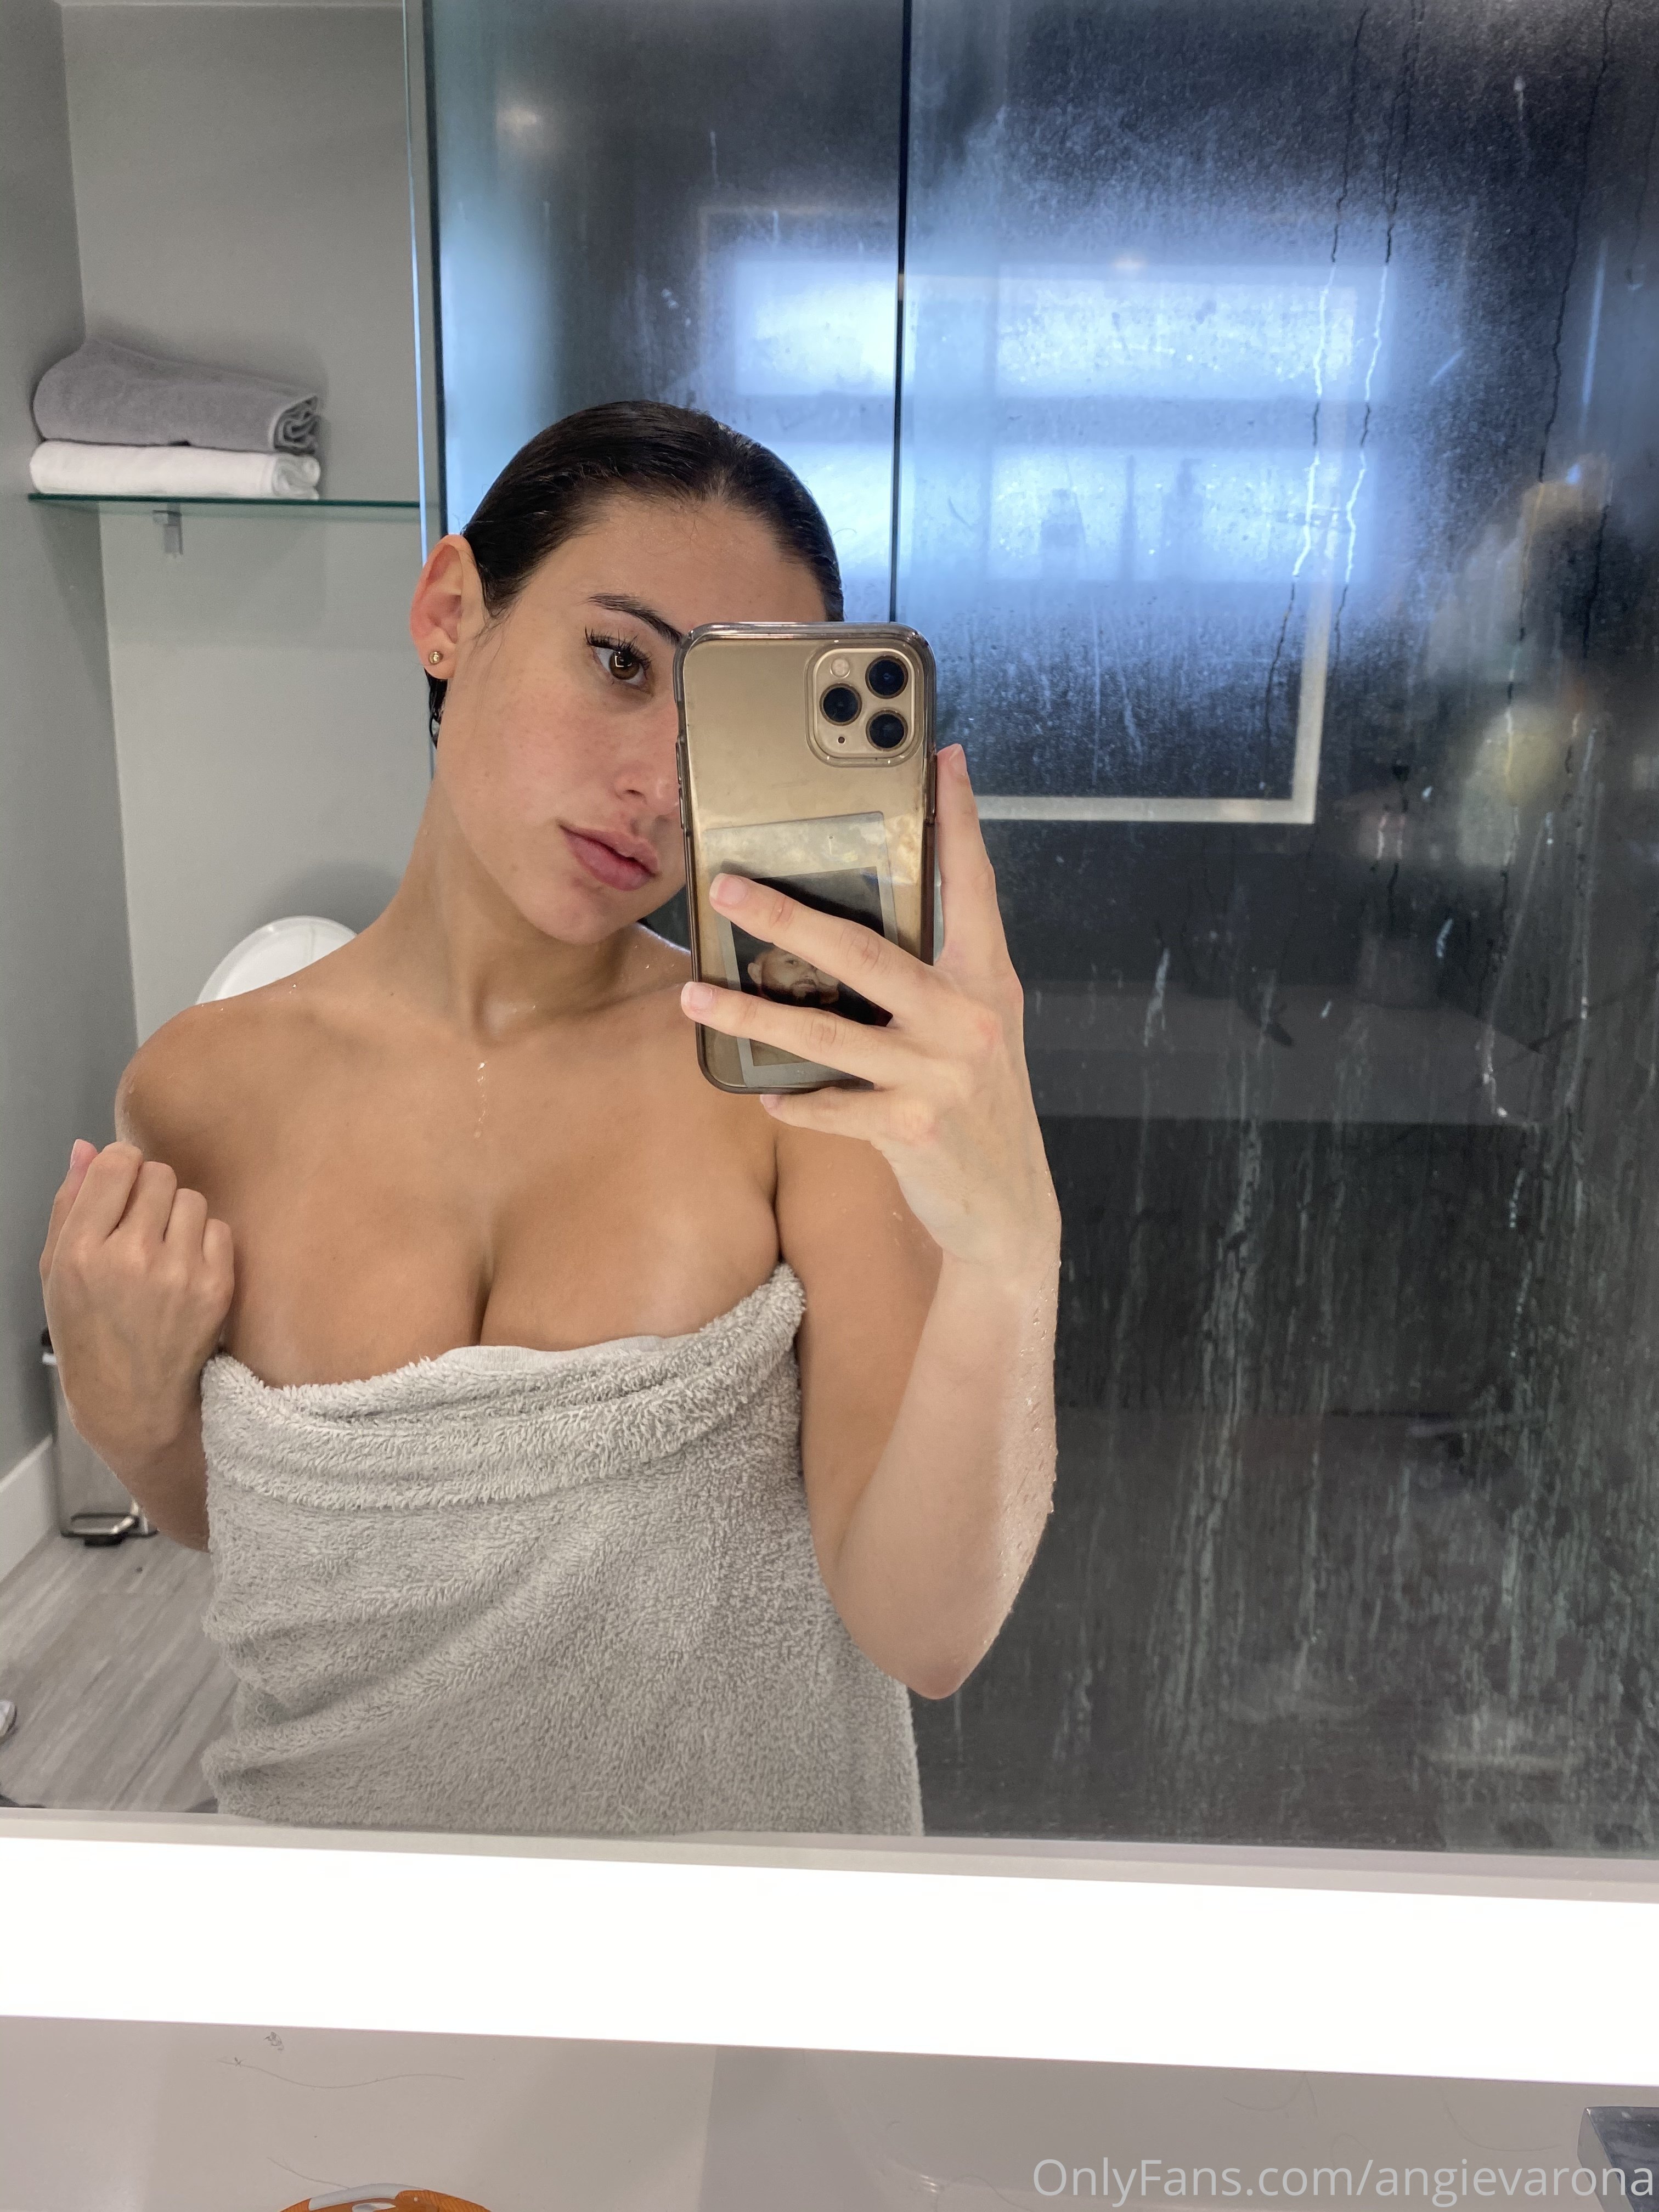 You are looking on "https://paradisexxx.com/angie-varona-nude-onlyfans/" .